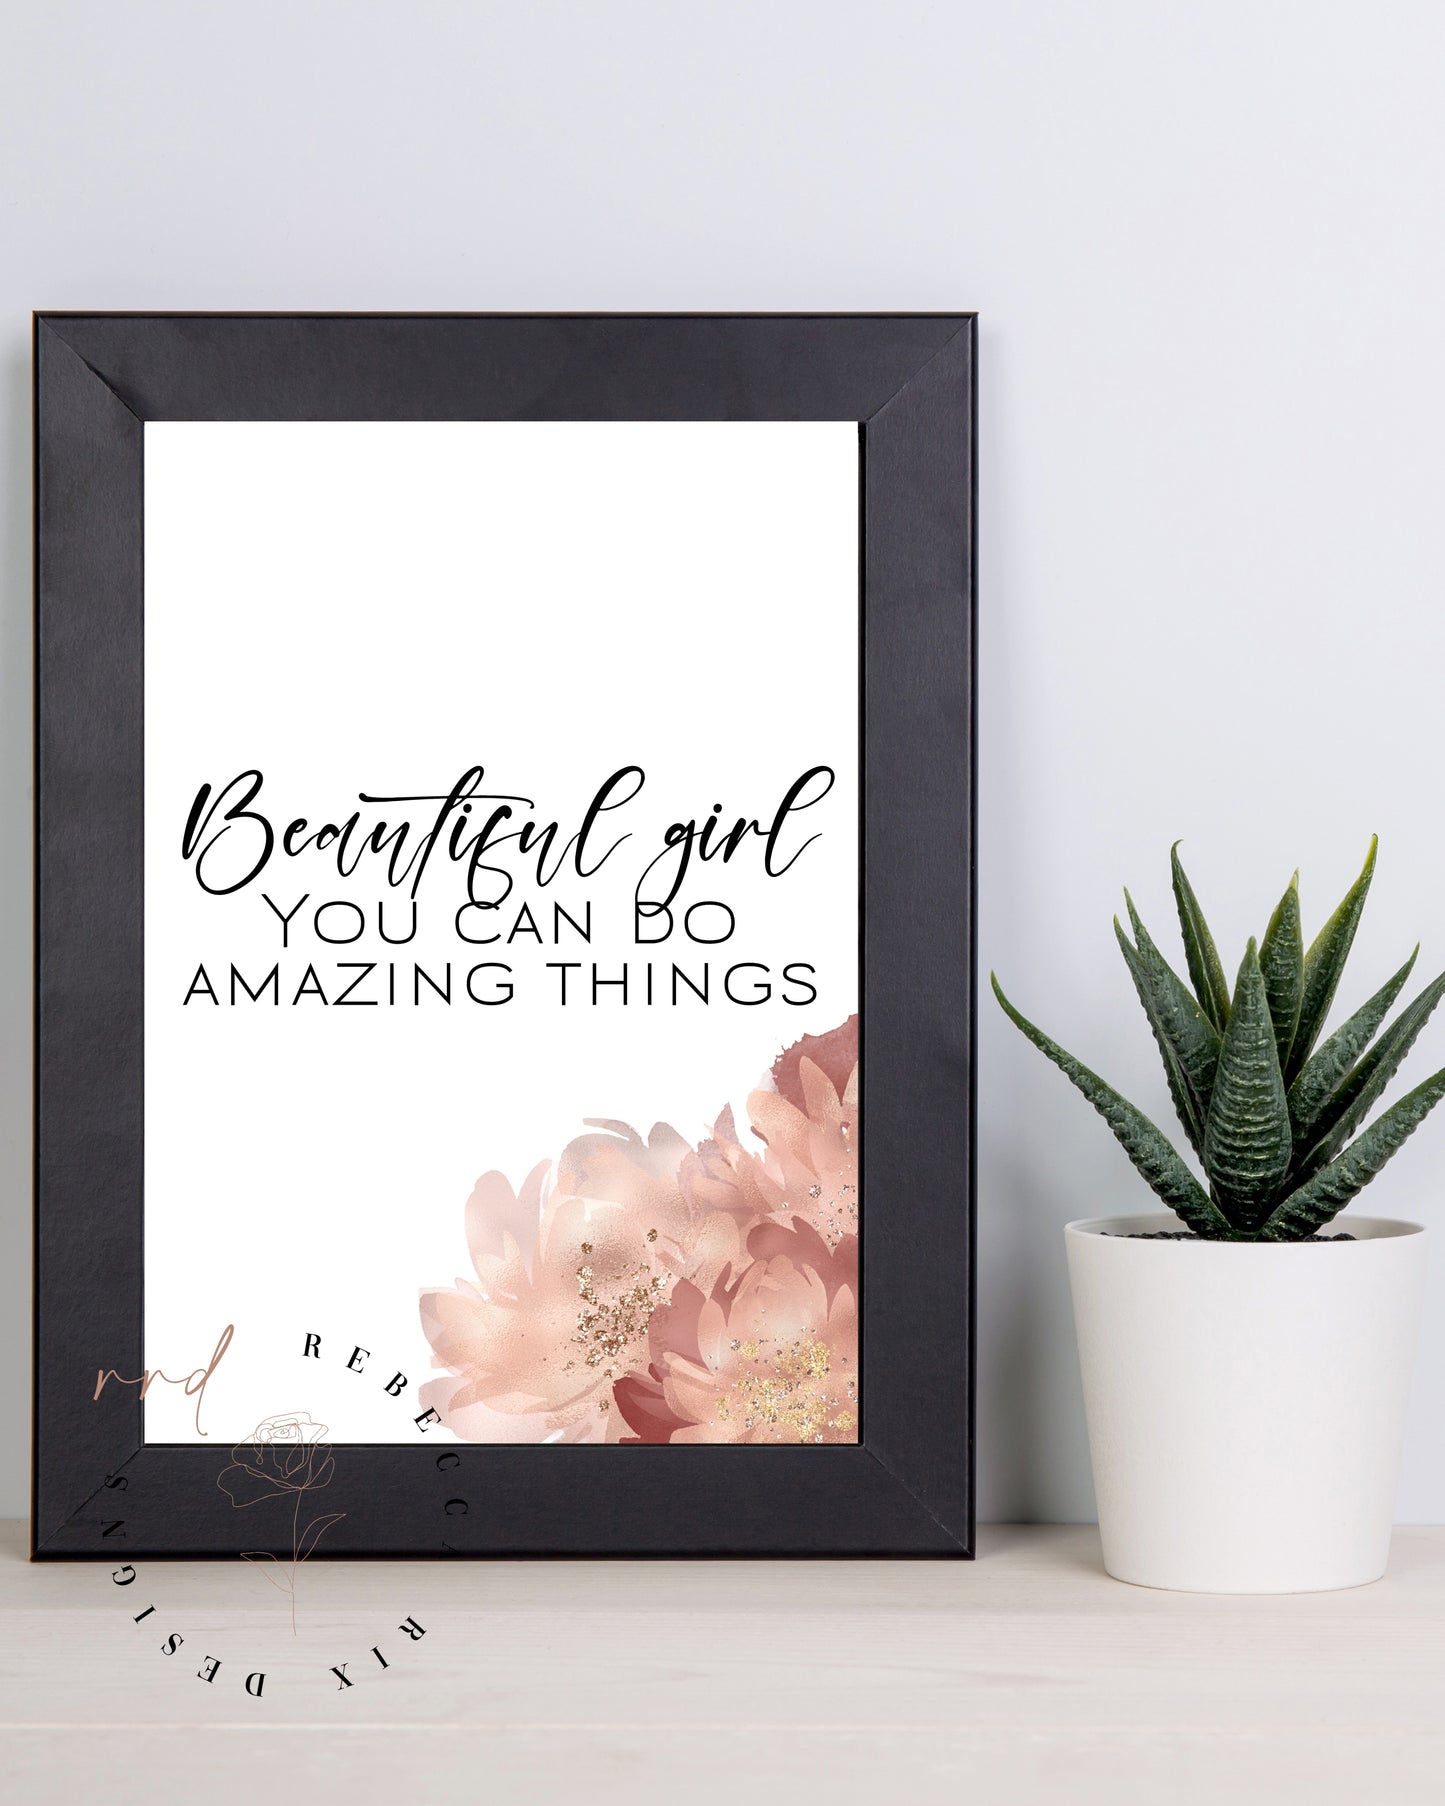 "Beautiful Girl You Can Do Amazing Things" Motivational & Inspirational Quote For Girls, Printable Wall Art